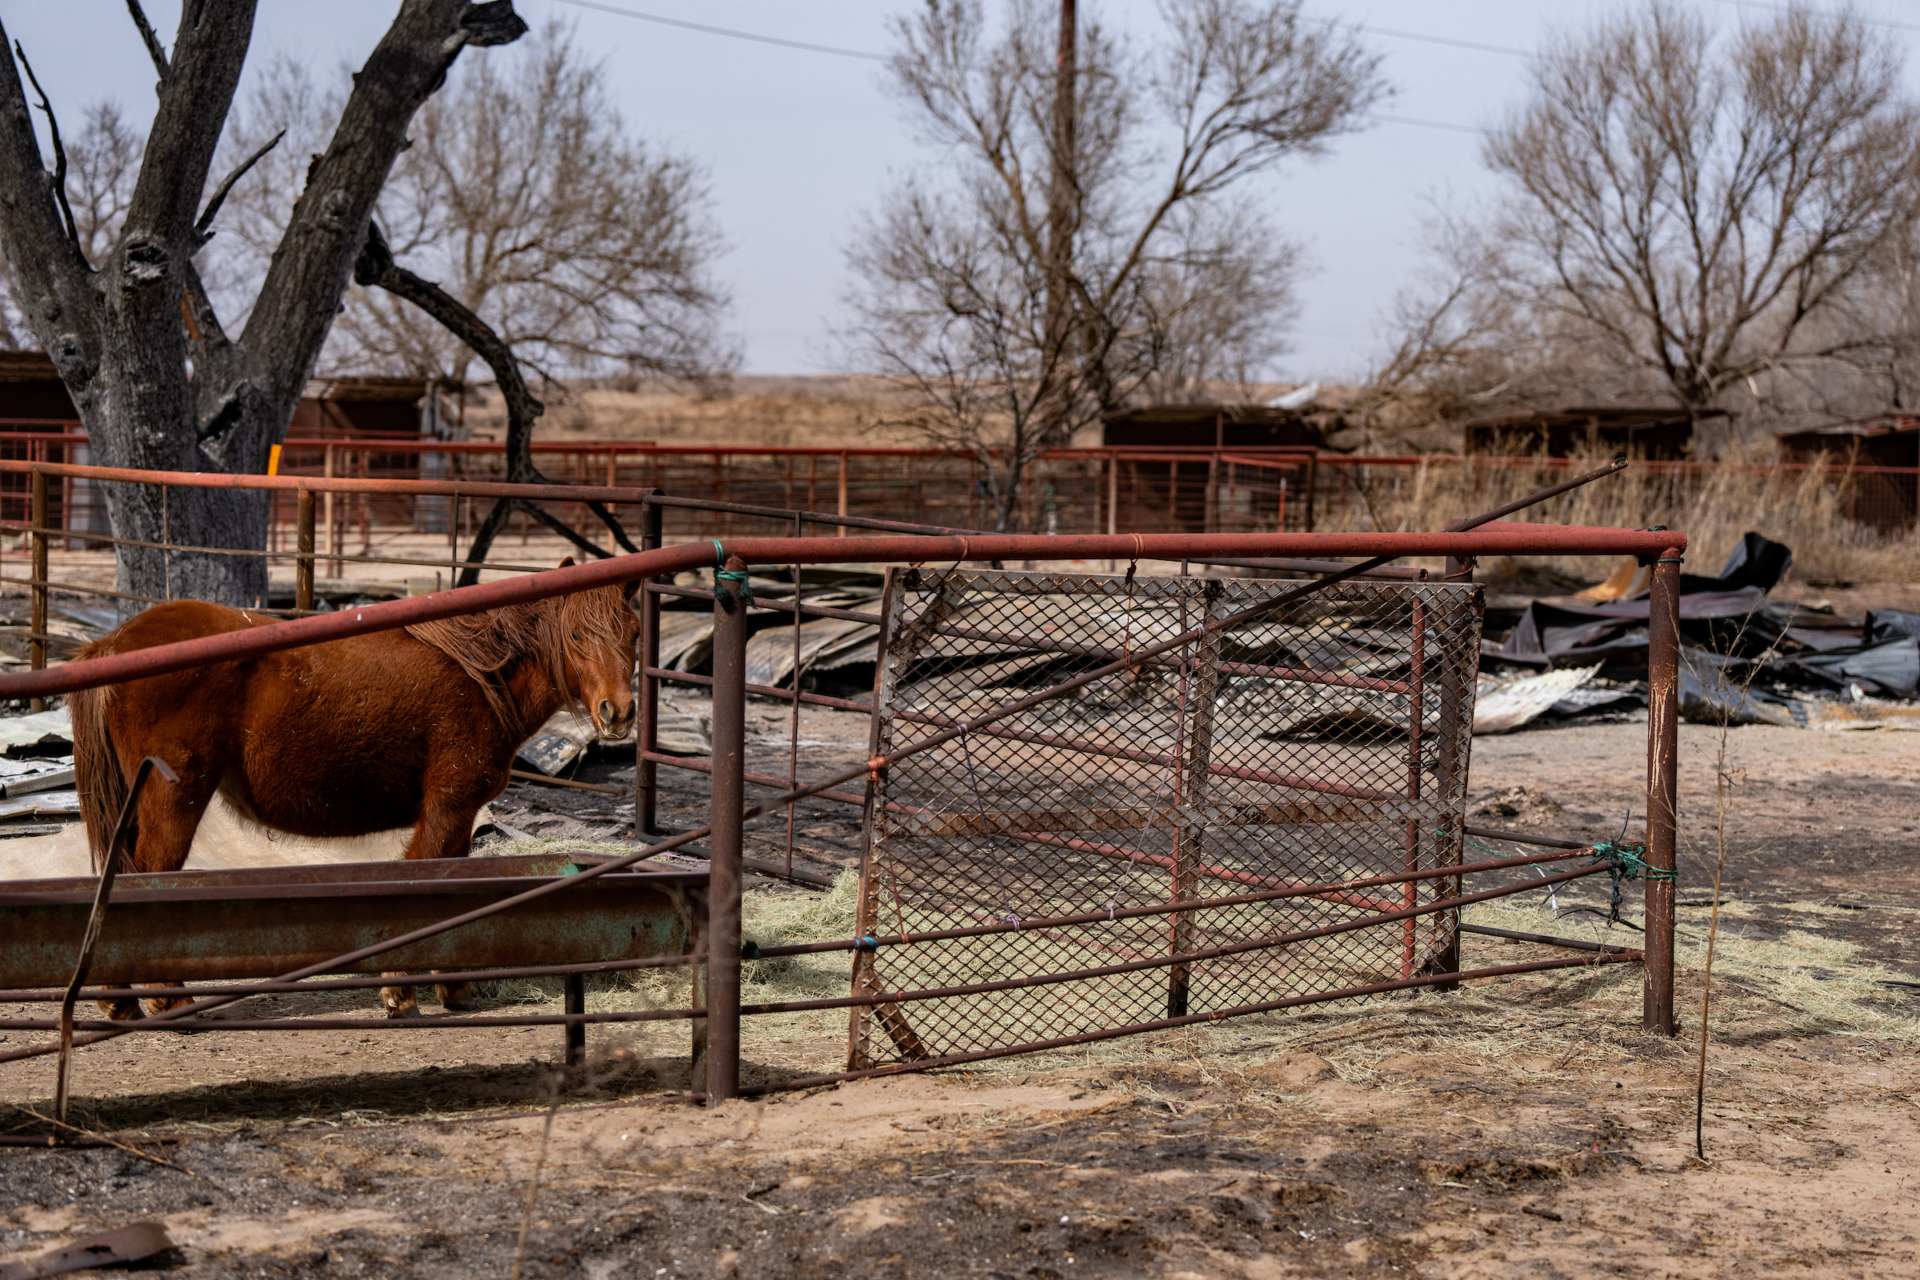 Livestock respiratory issues expected following Panhandle wildfires